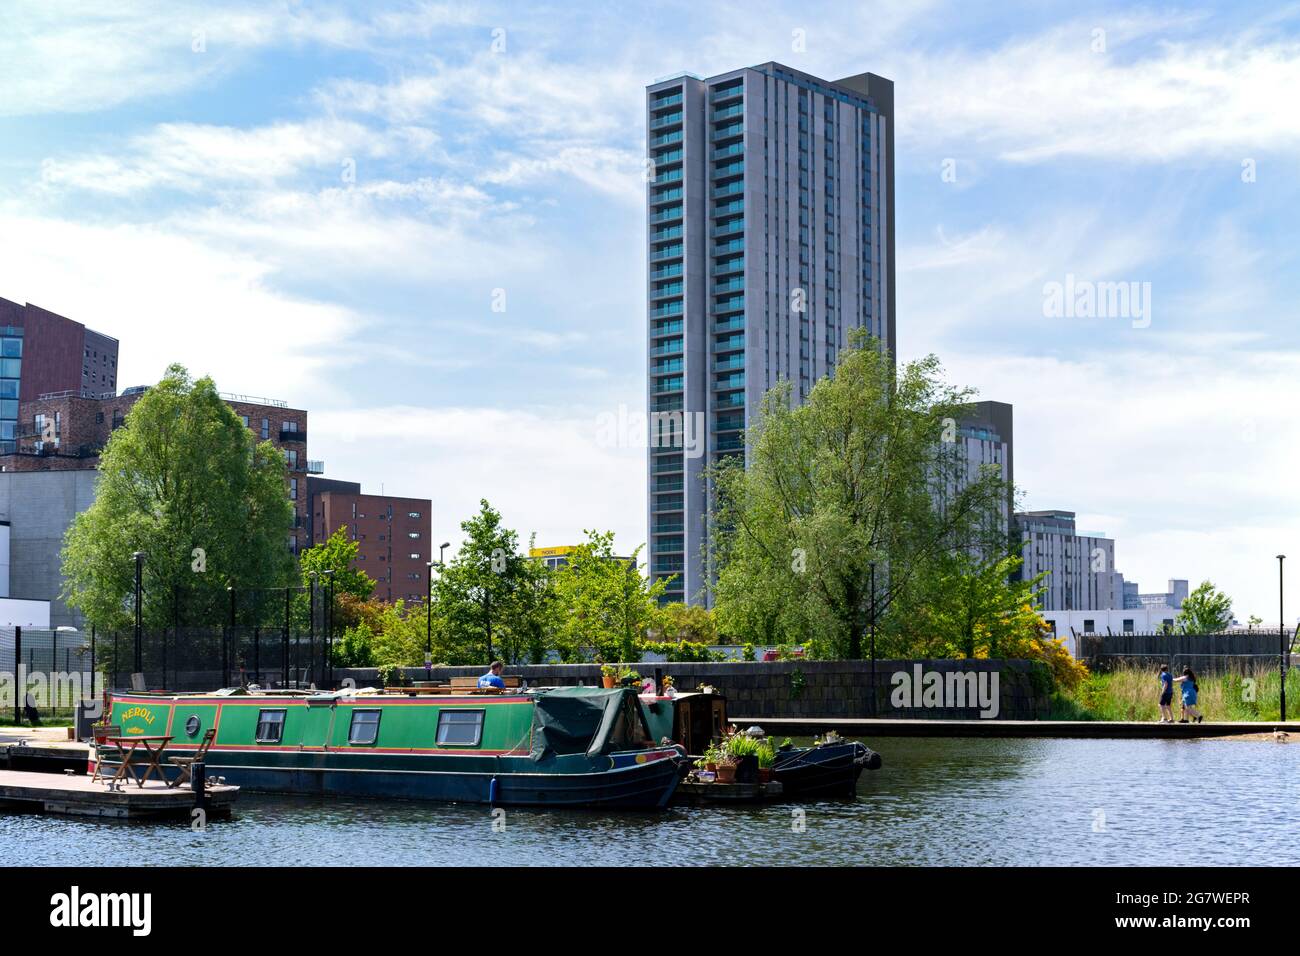 The Oxygen Tower apartment block from the Cotton Field Park marina, New Islington, Ancoats, Manchester, England, UK Stock Photo